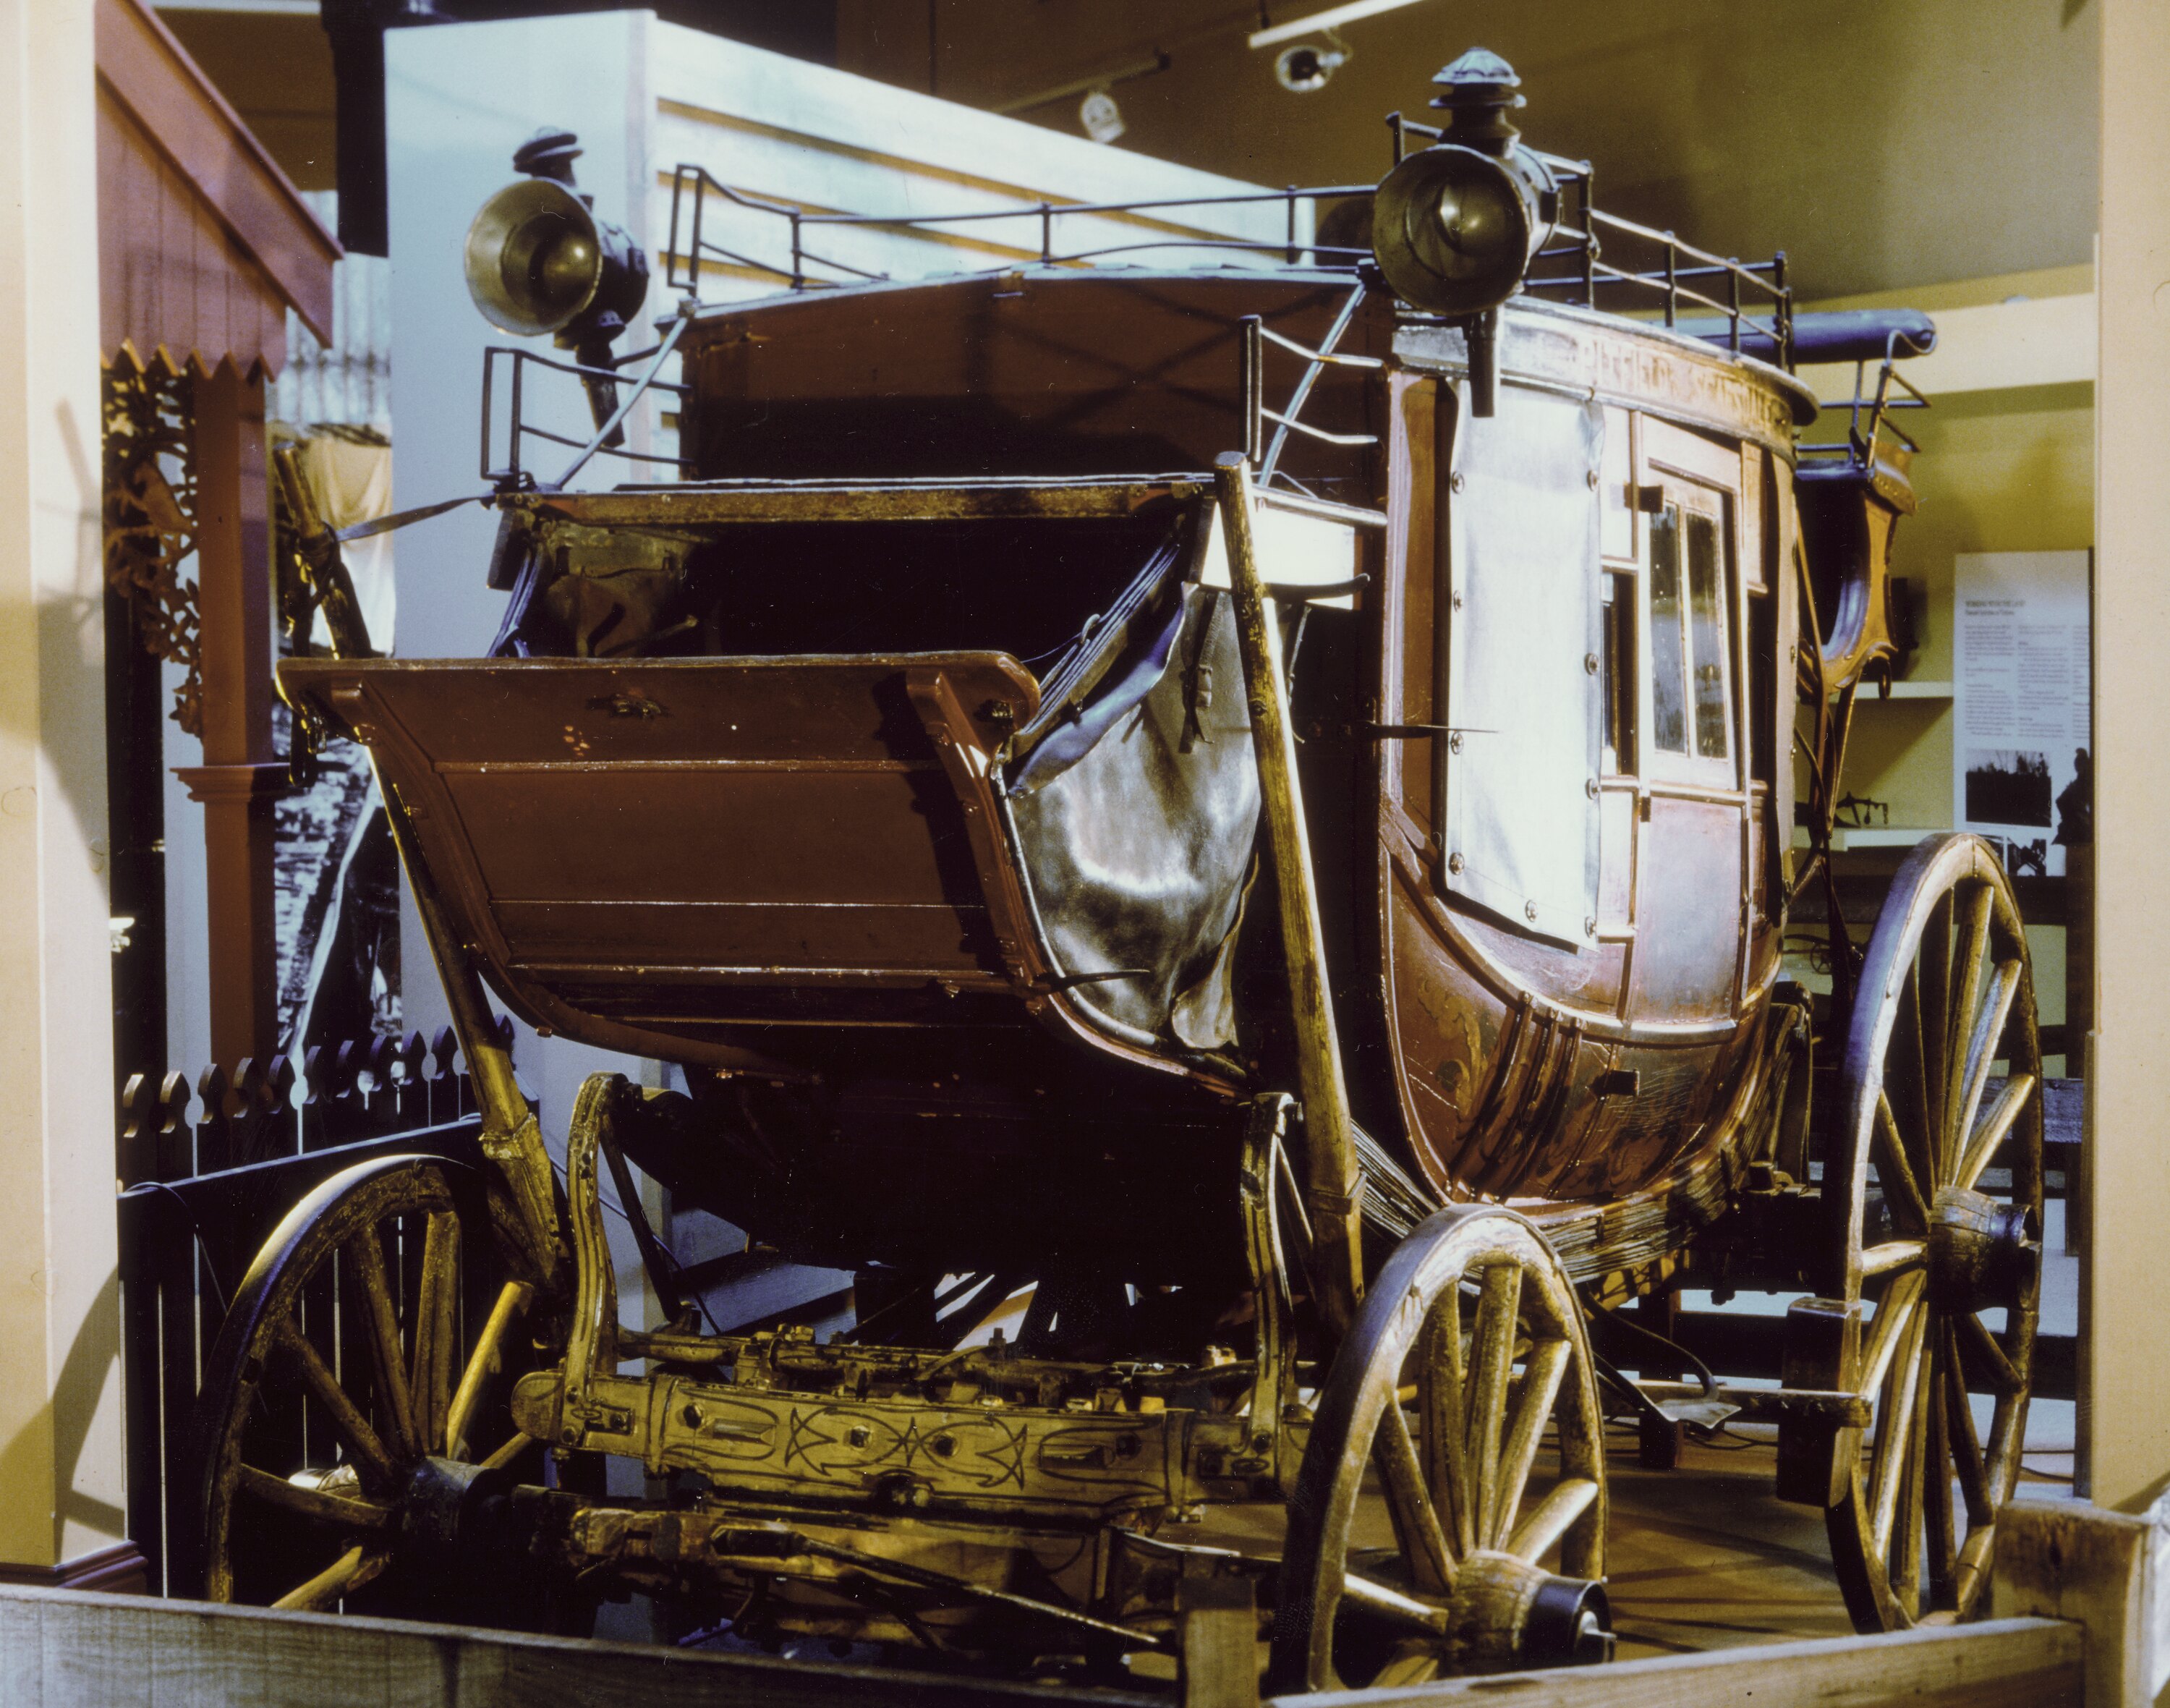 Coach - Abbott & Downing, 'Concord' Jack Type, Passenger & Mail Coach, New  Hampshire, United States of America, circa 1869